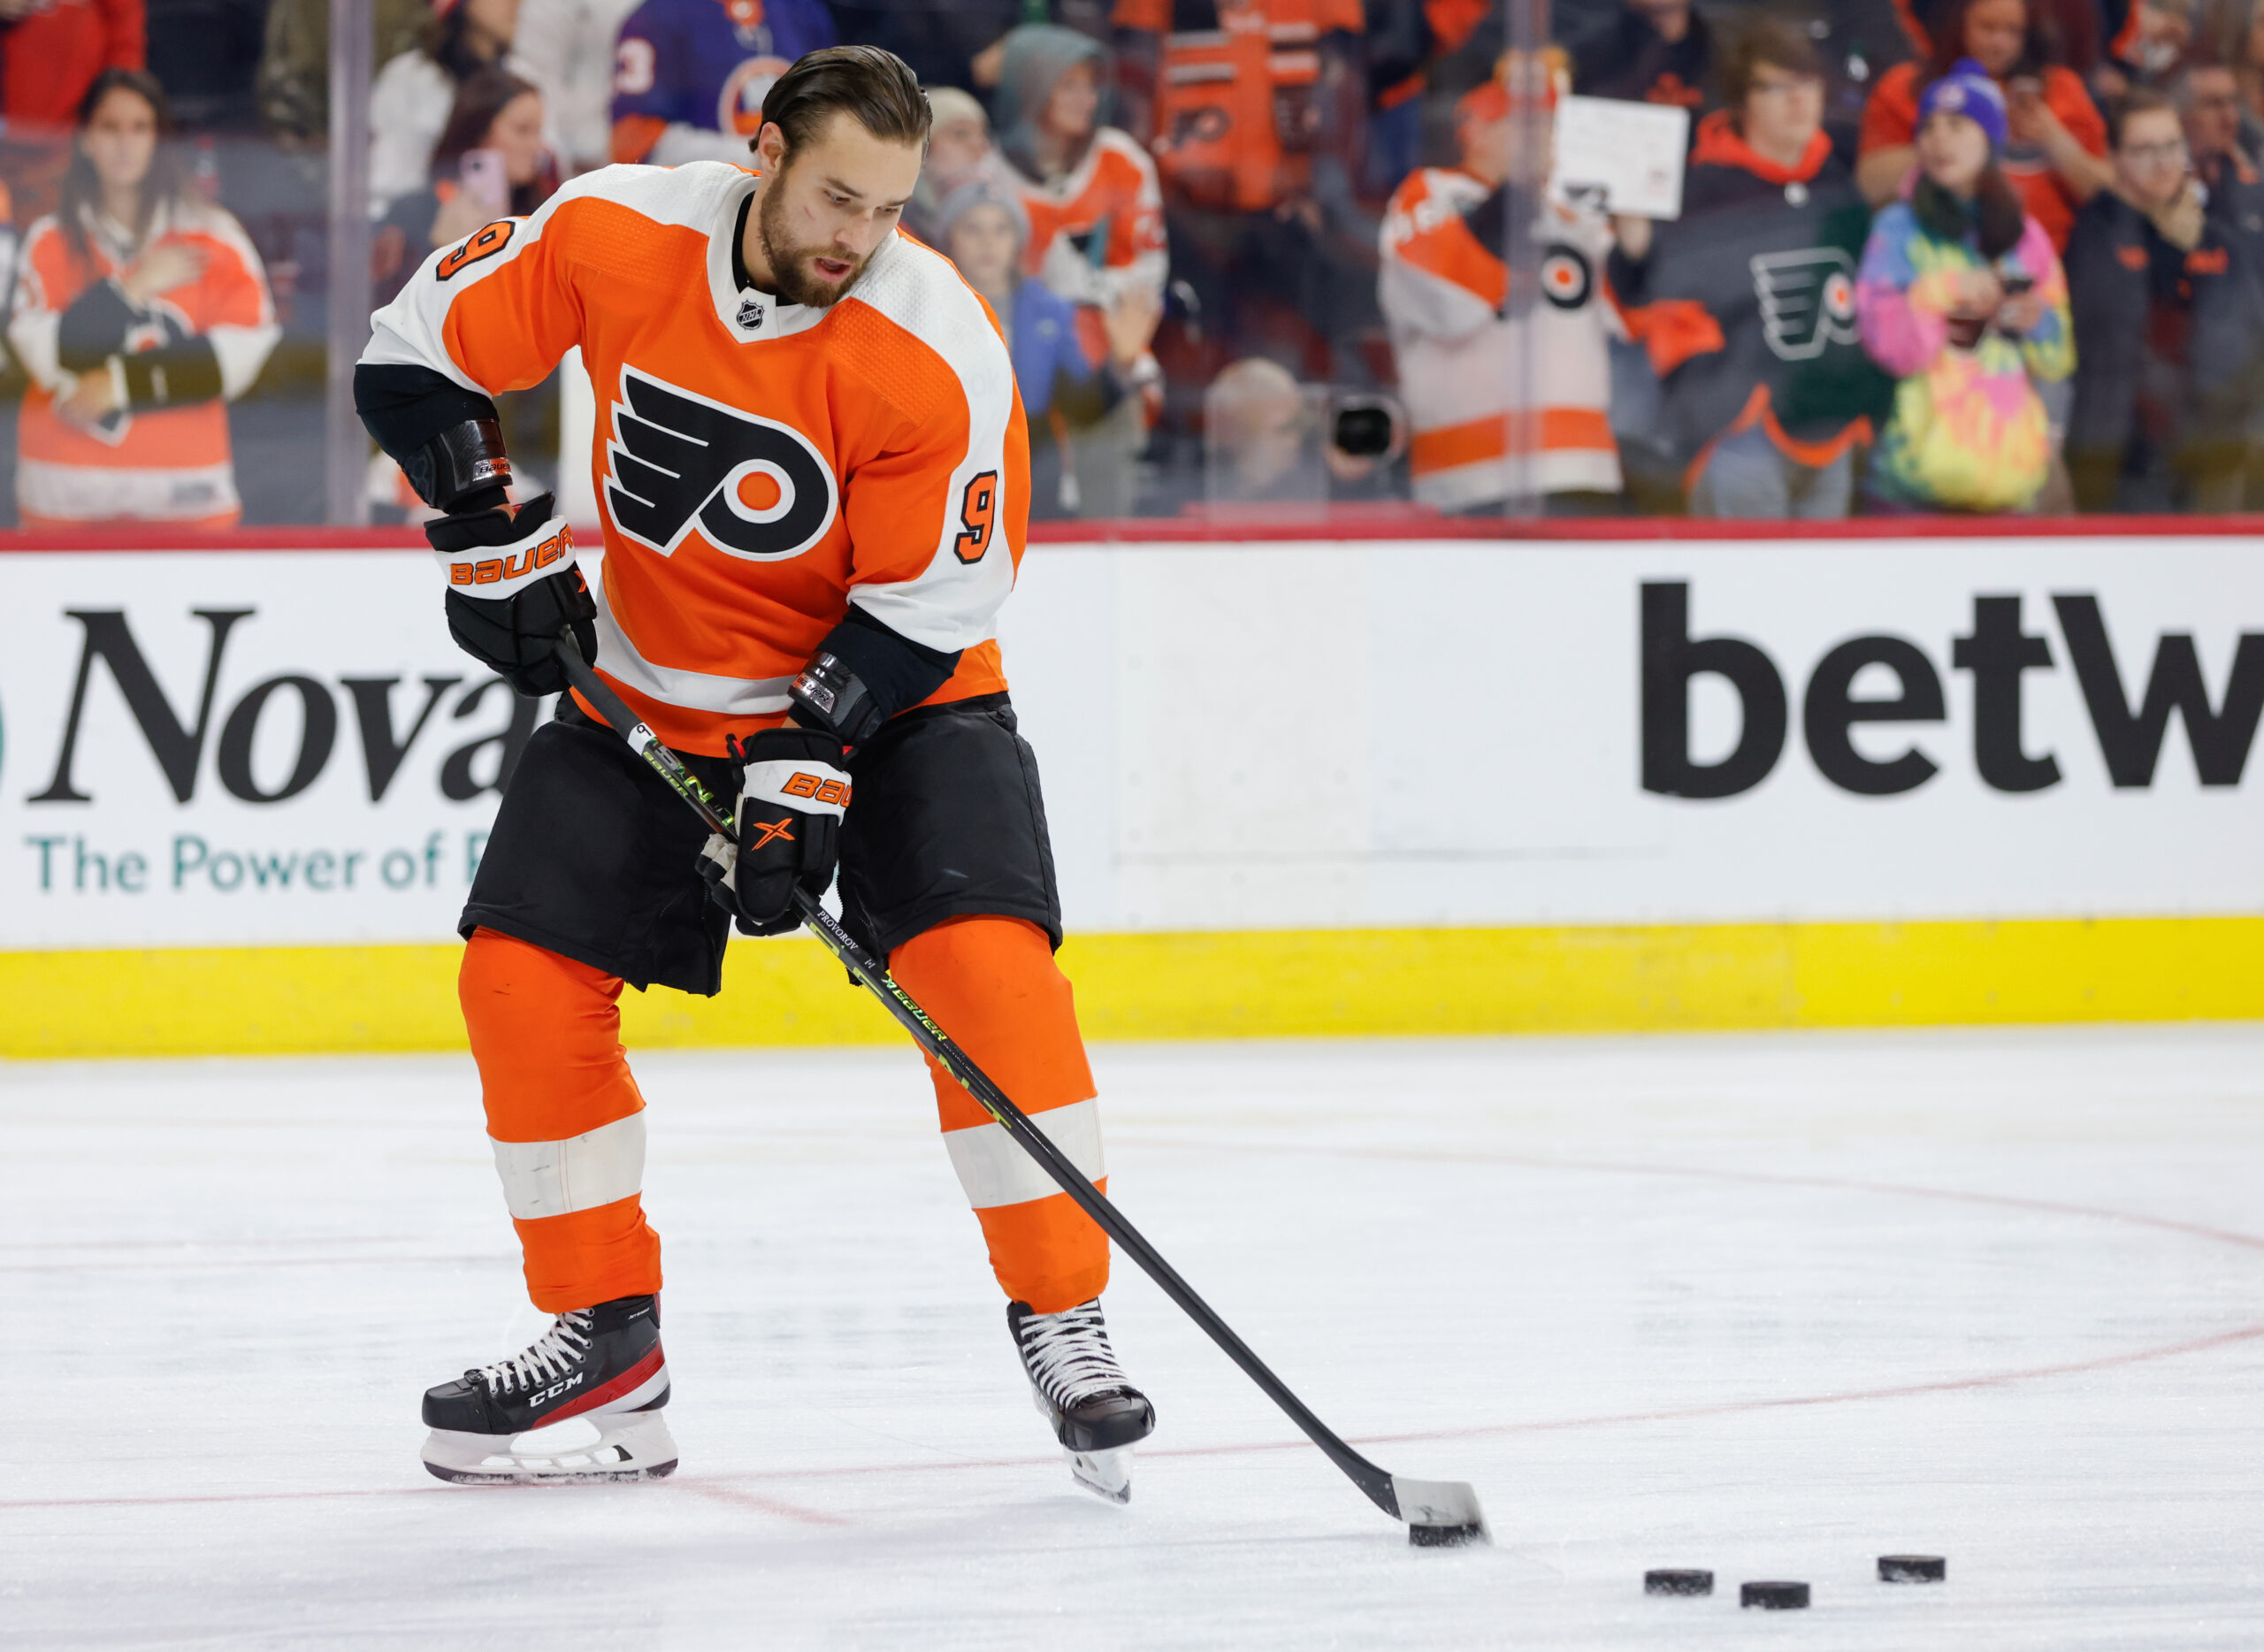 NHL analyst says Ivan Provorov can 'get involved' with Russia